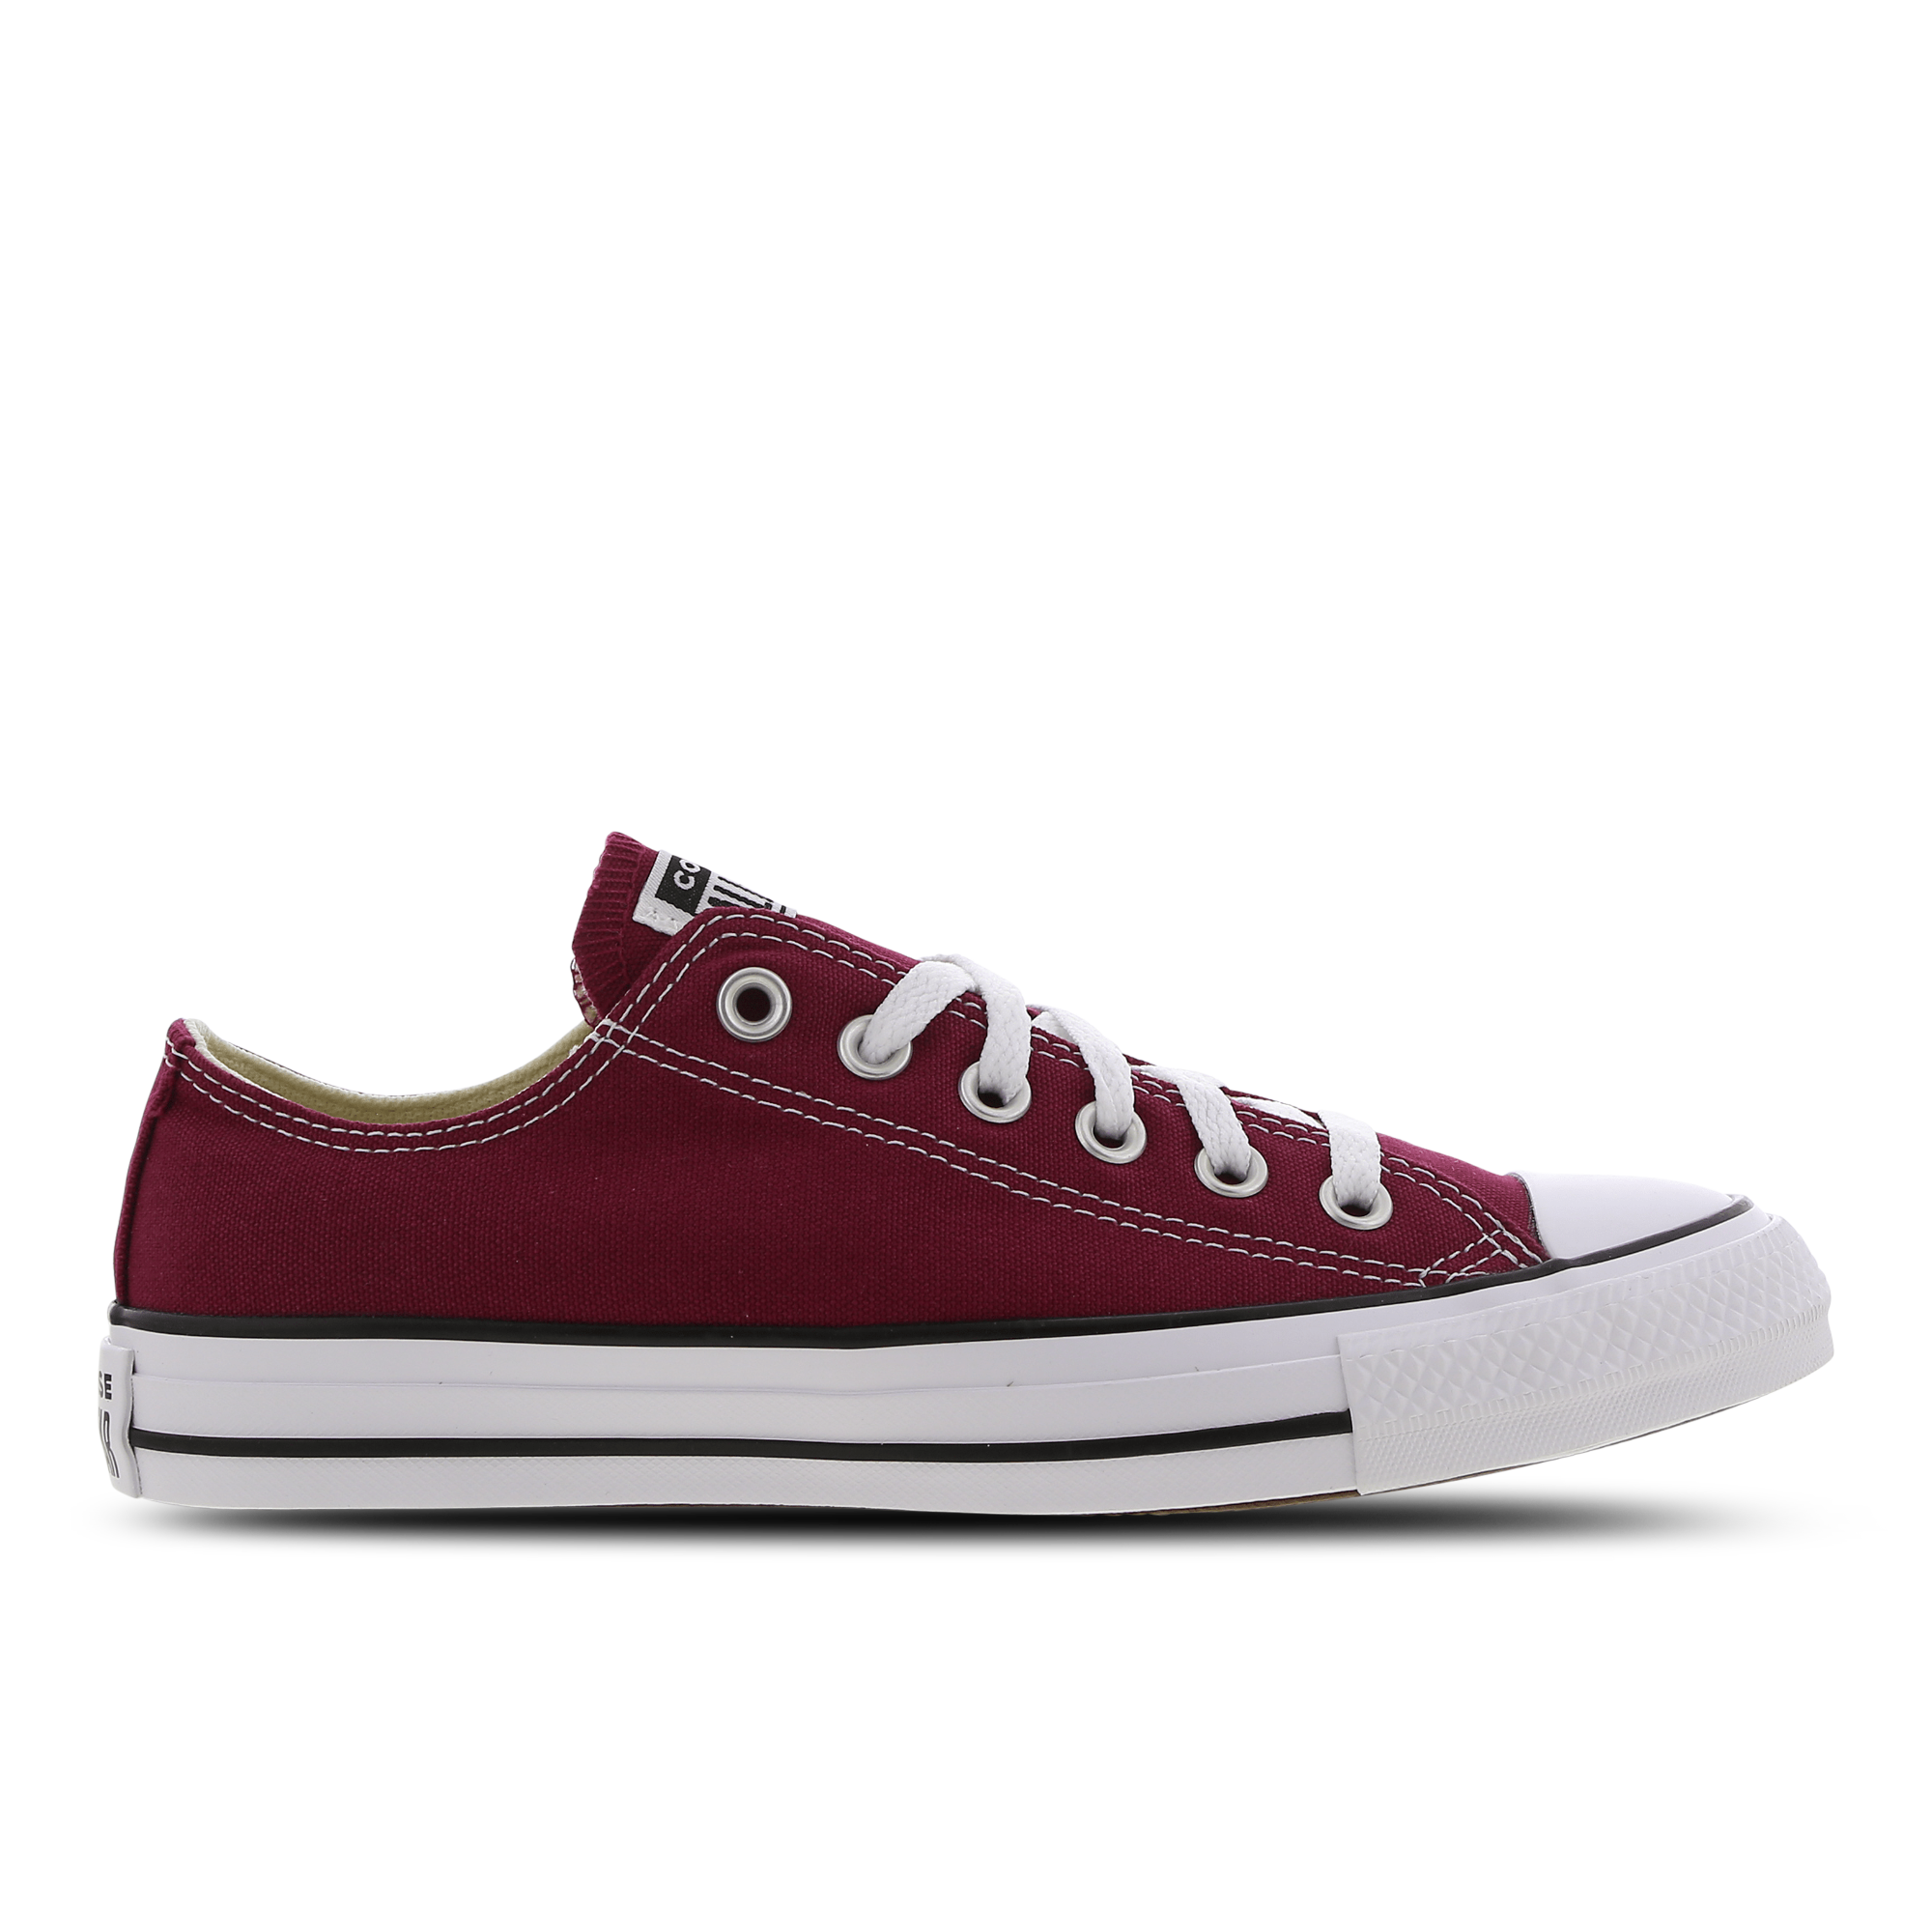 Converse Chuck Taylor All Star Low